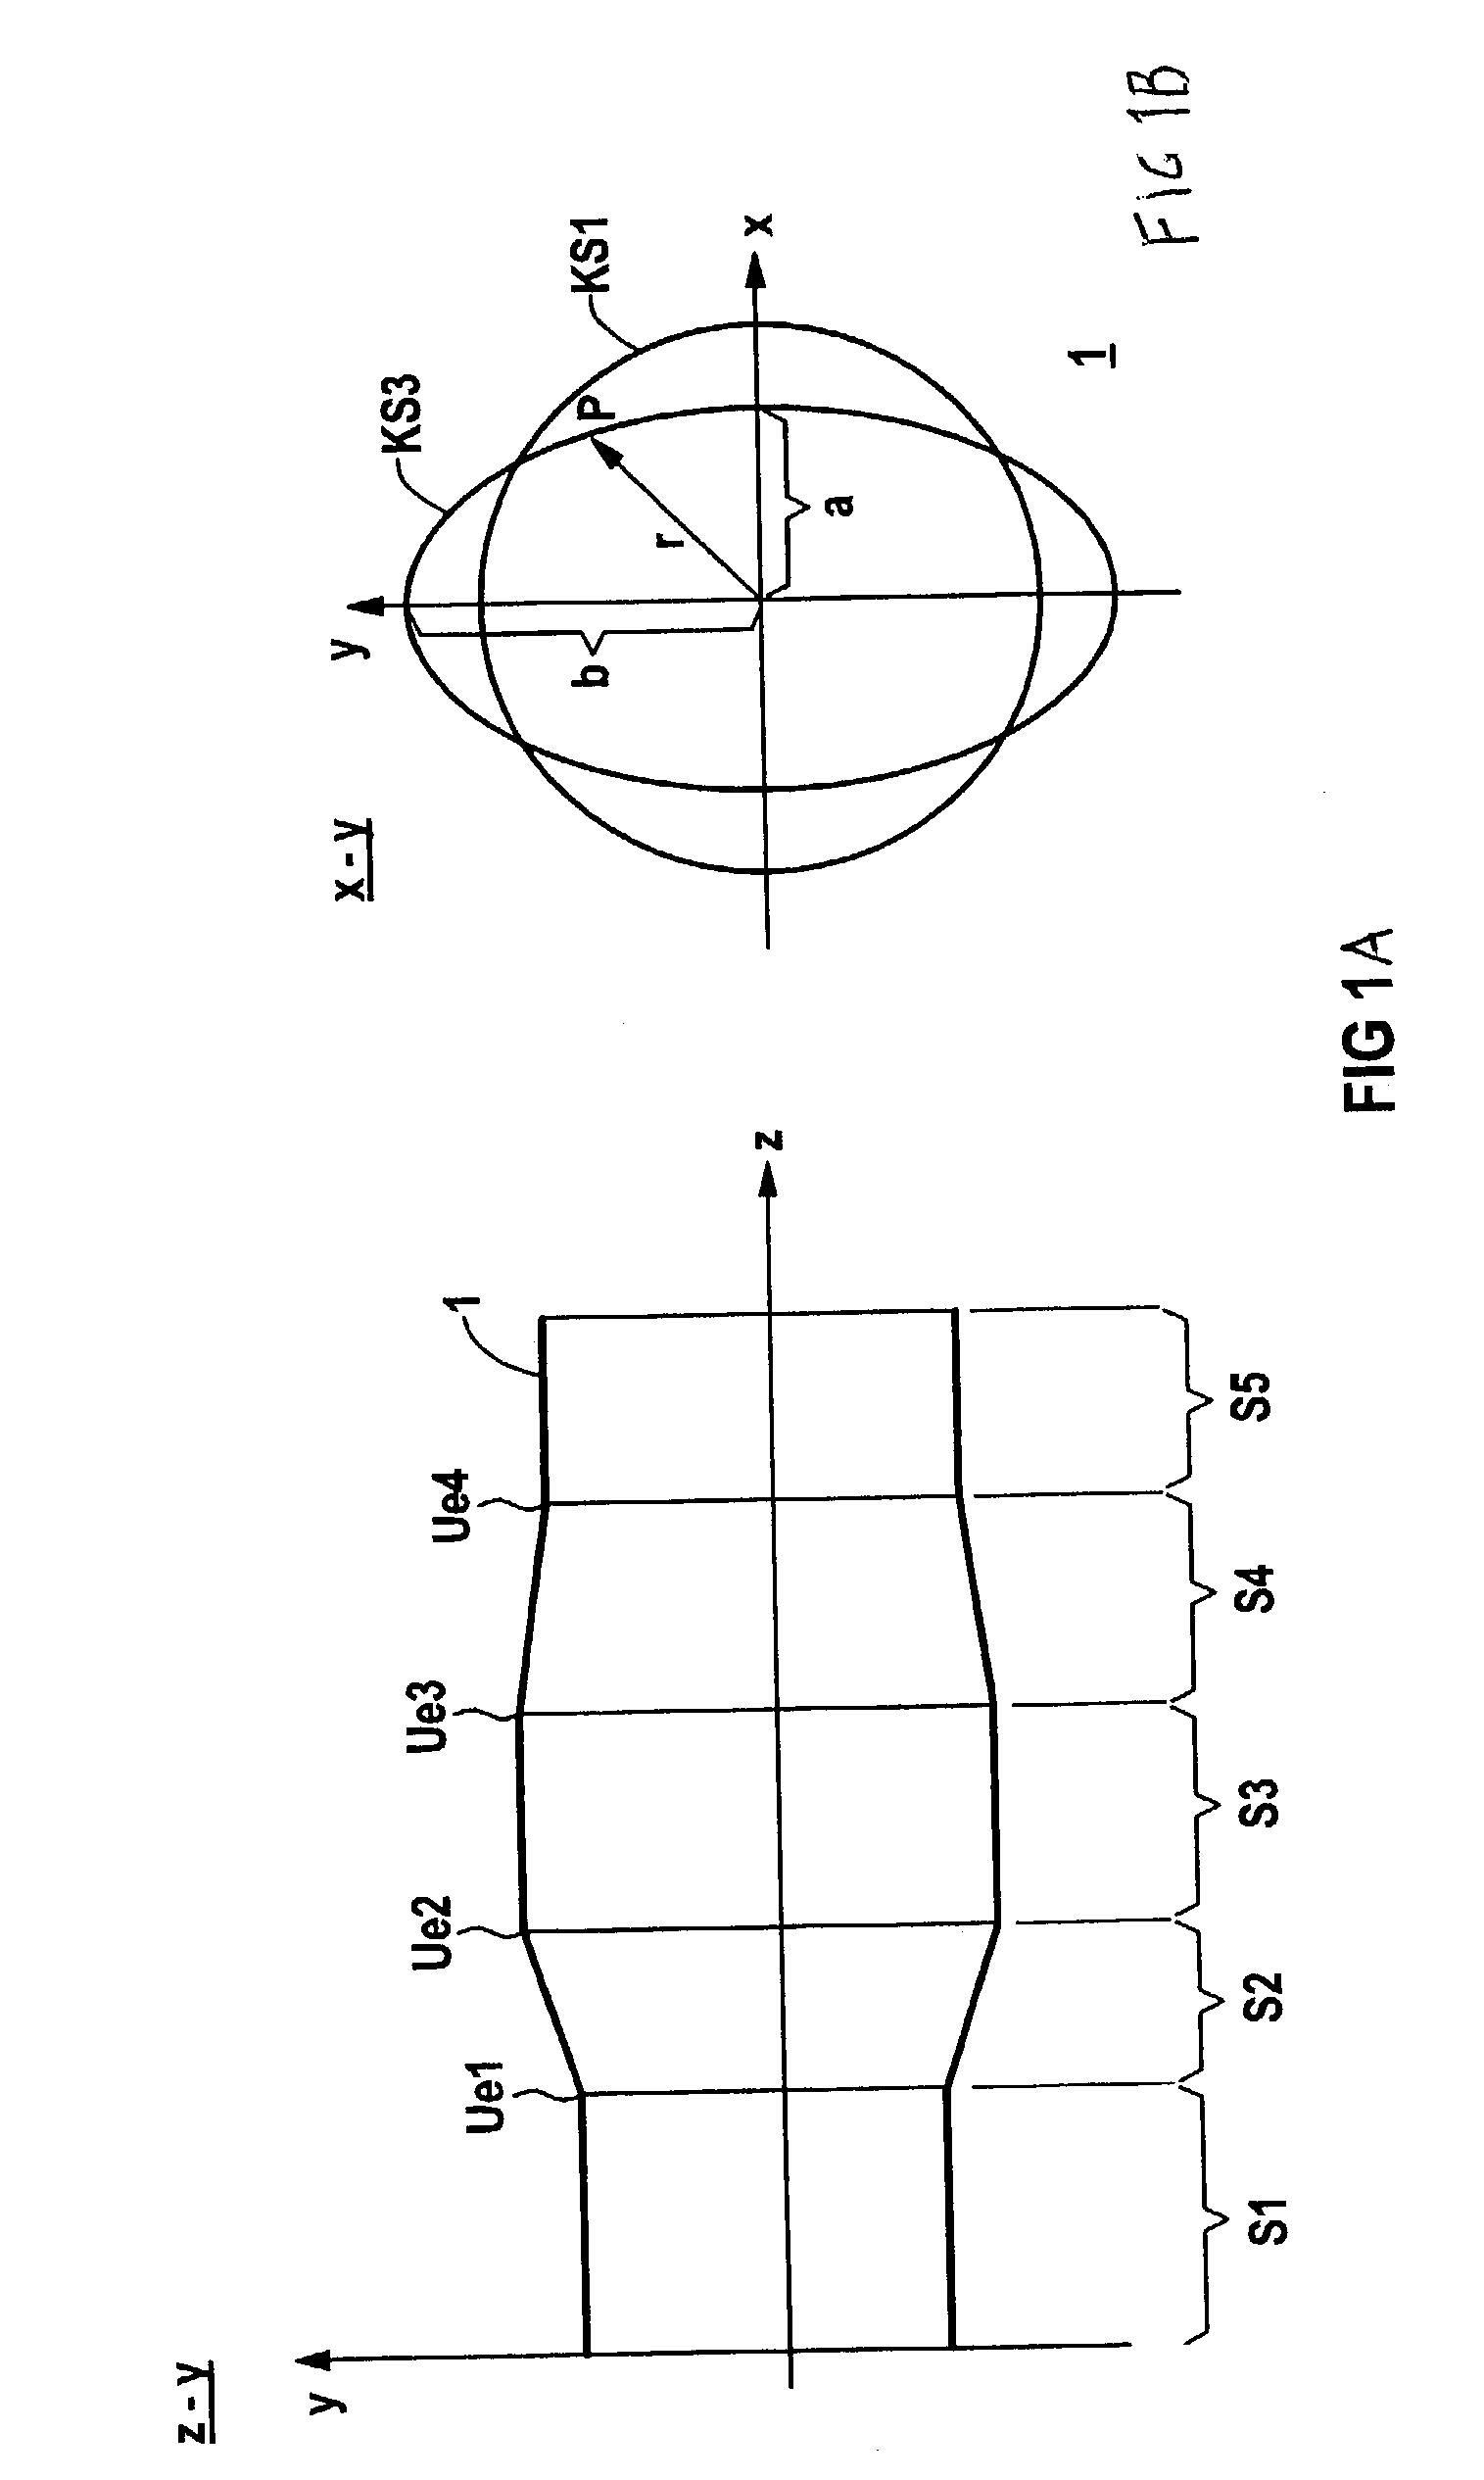 Method for controlling an industrial processing machine